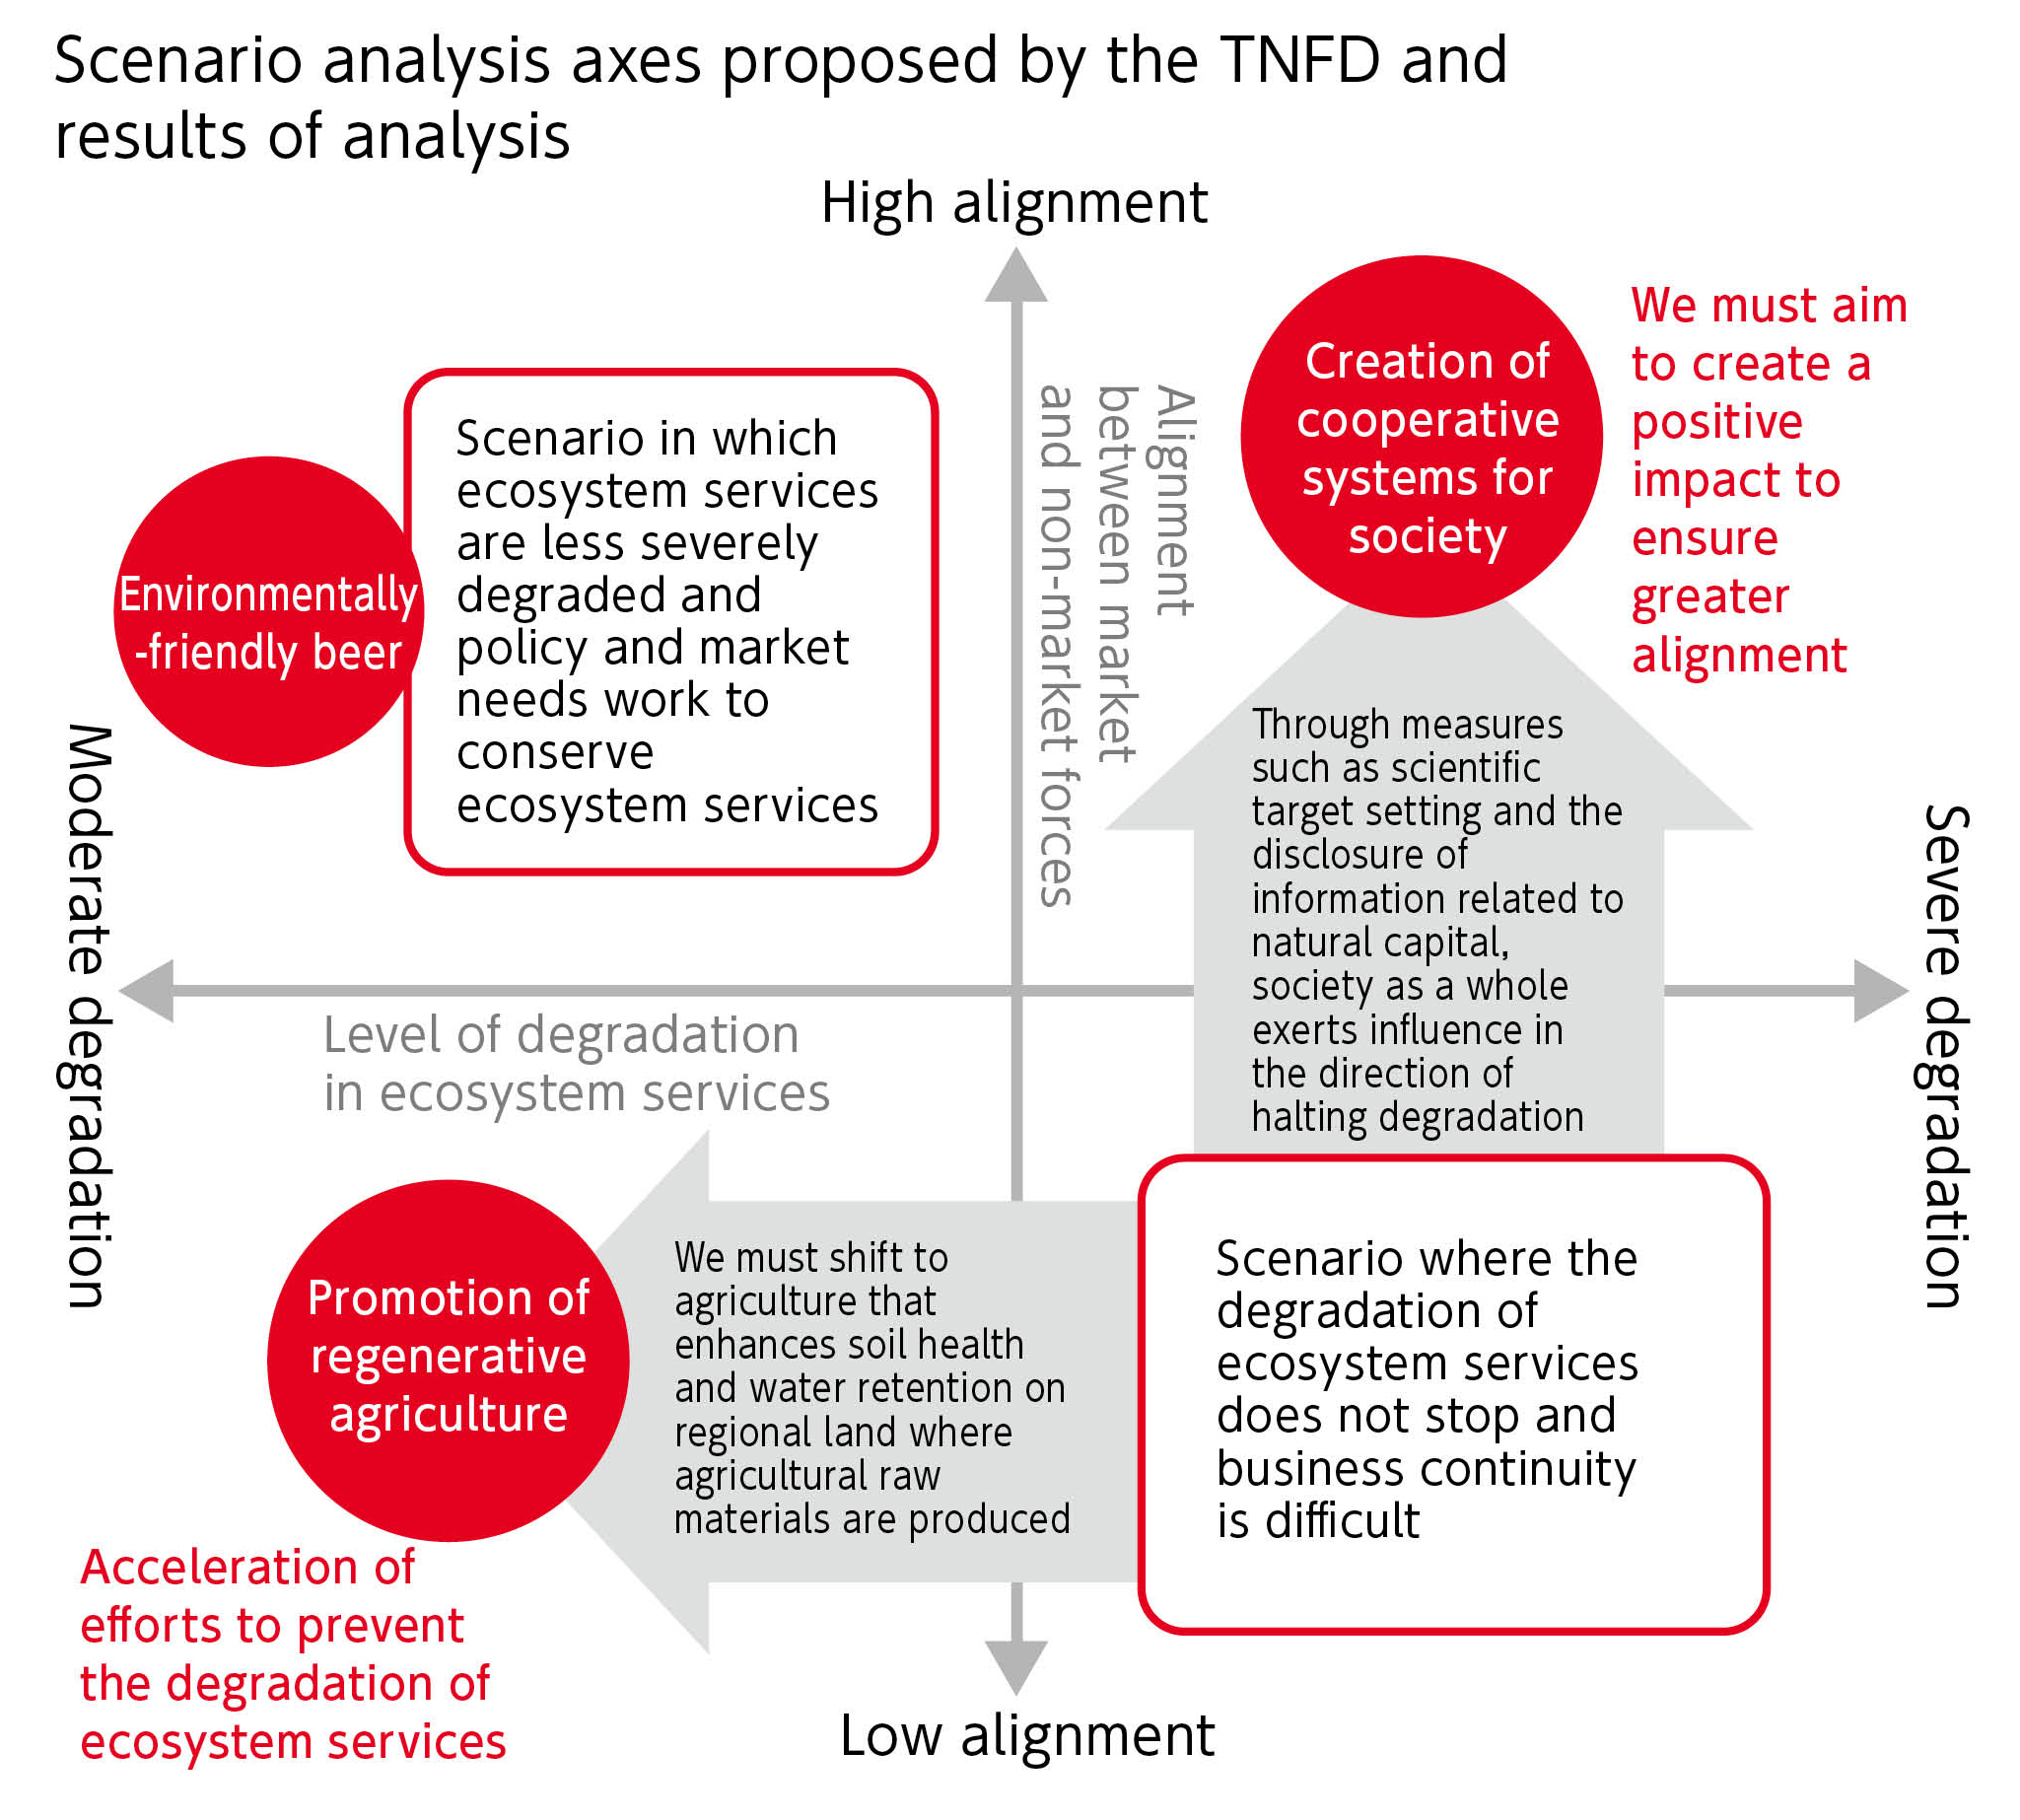 Scenario analysis axes proposed by the TNFD and results of analysis